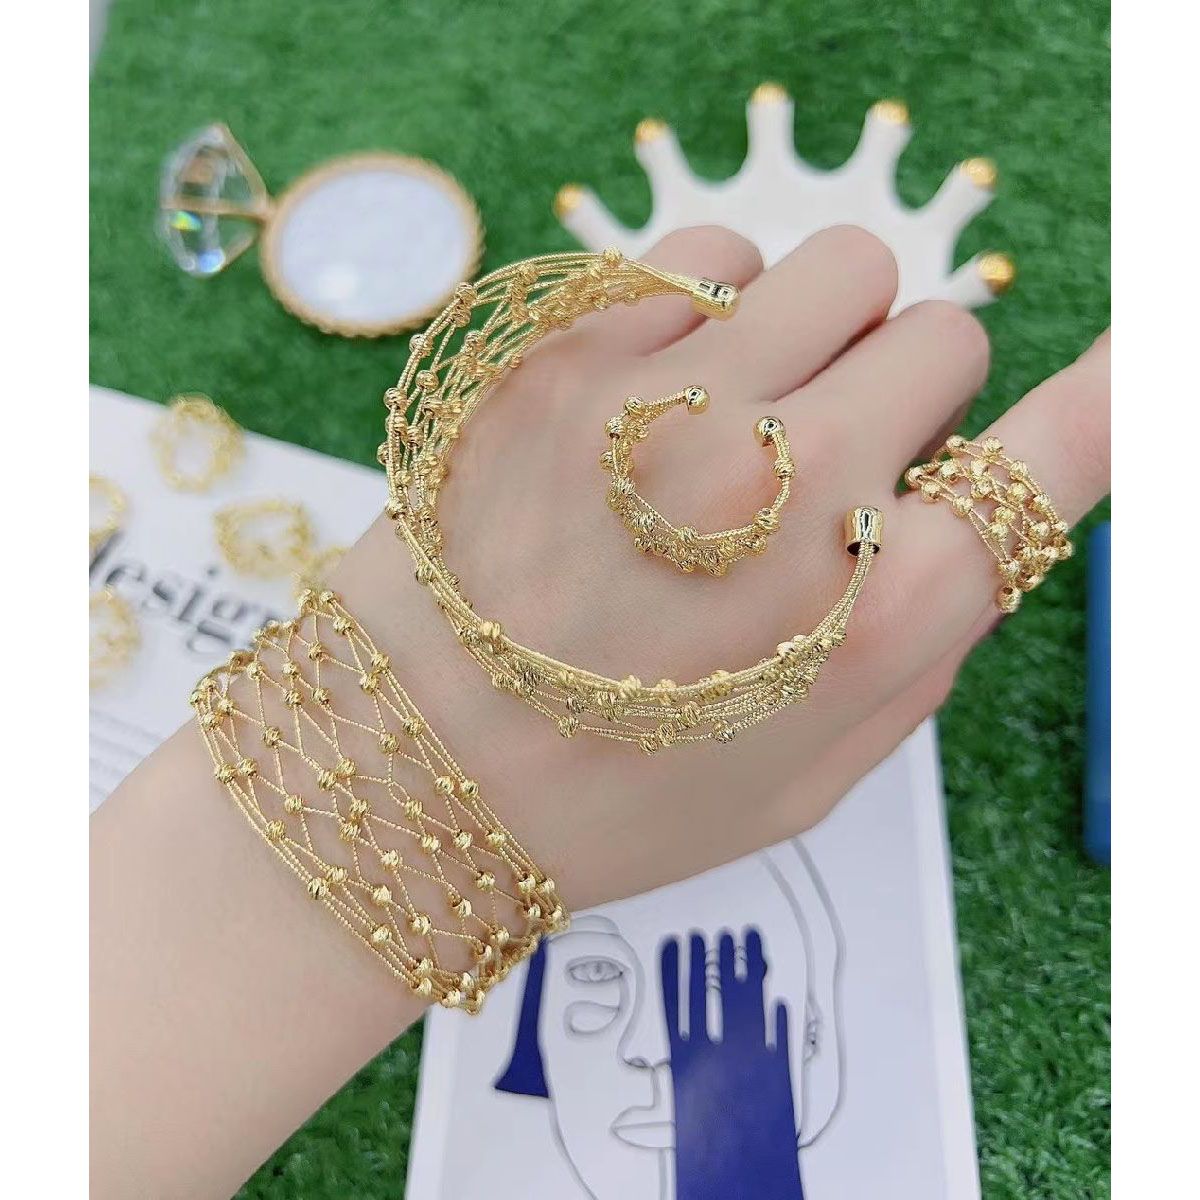 Amazon.com: 18K Solid Gold Bracelets for Women, Yellow Gold Beads Ball  Bracelet with Durable Chain Jewelry Gifts for Her, Mom, Wife, Girls 6.5